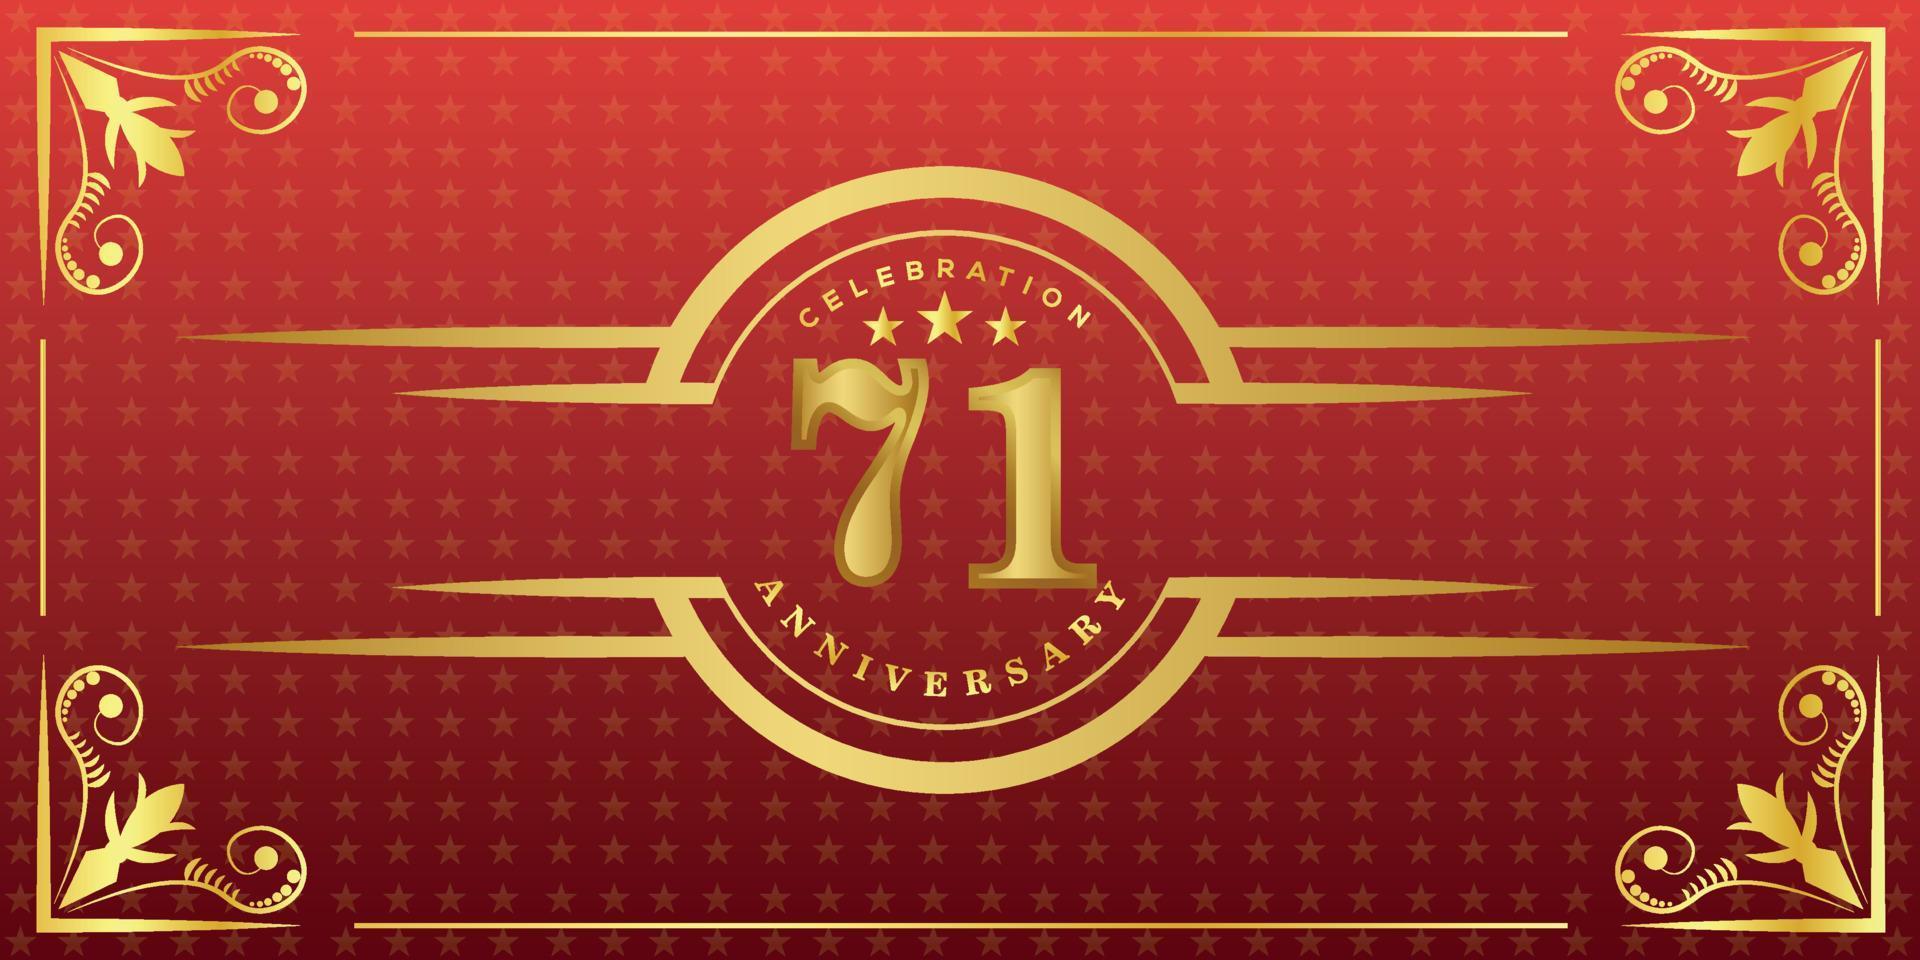 71st anniversary logo with golden ring, confetti and gold border isolated on elegant red background, sparkle, vector design for greeting card and invitation card